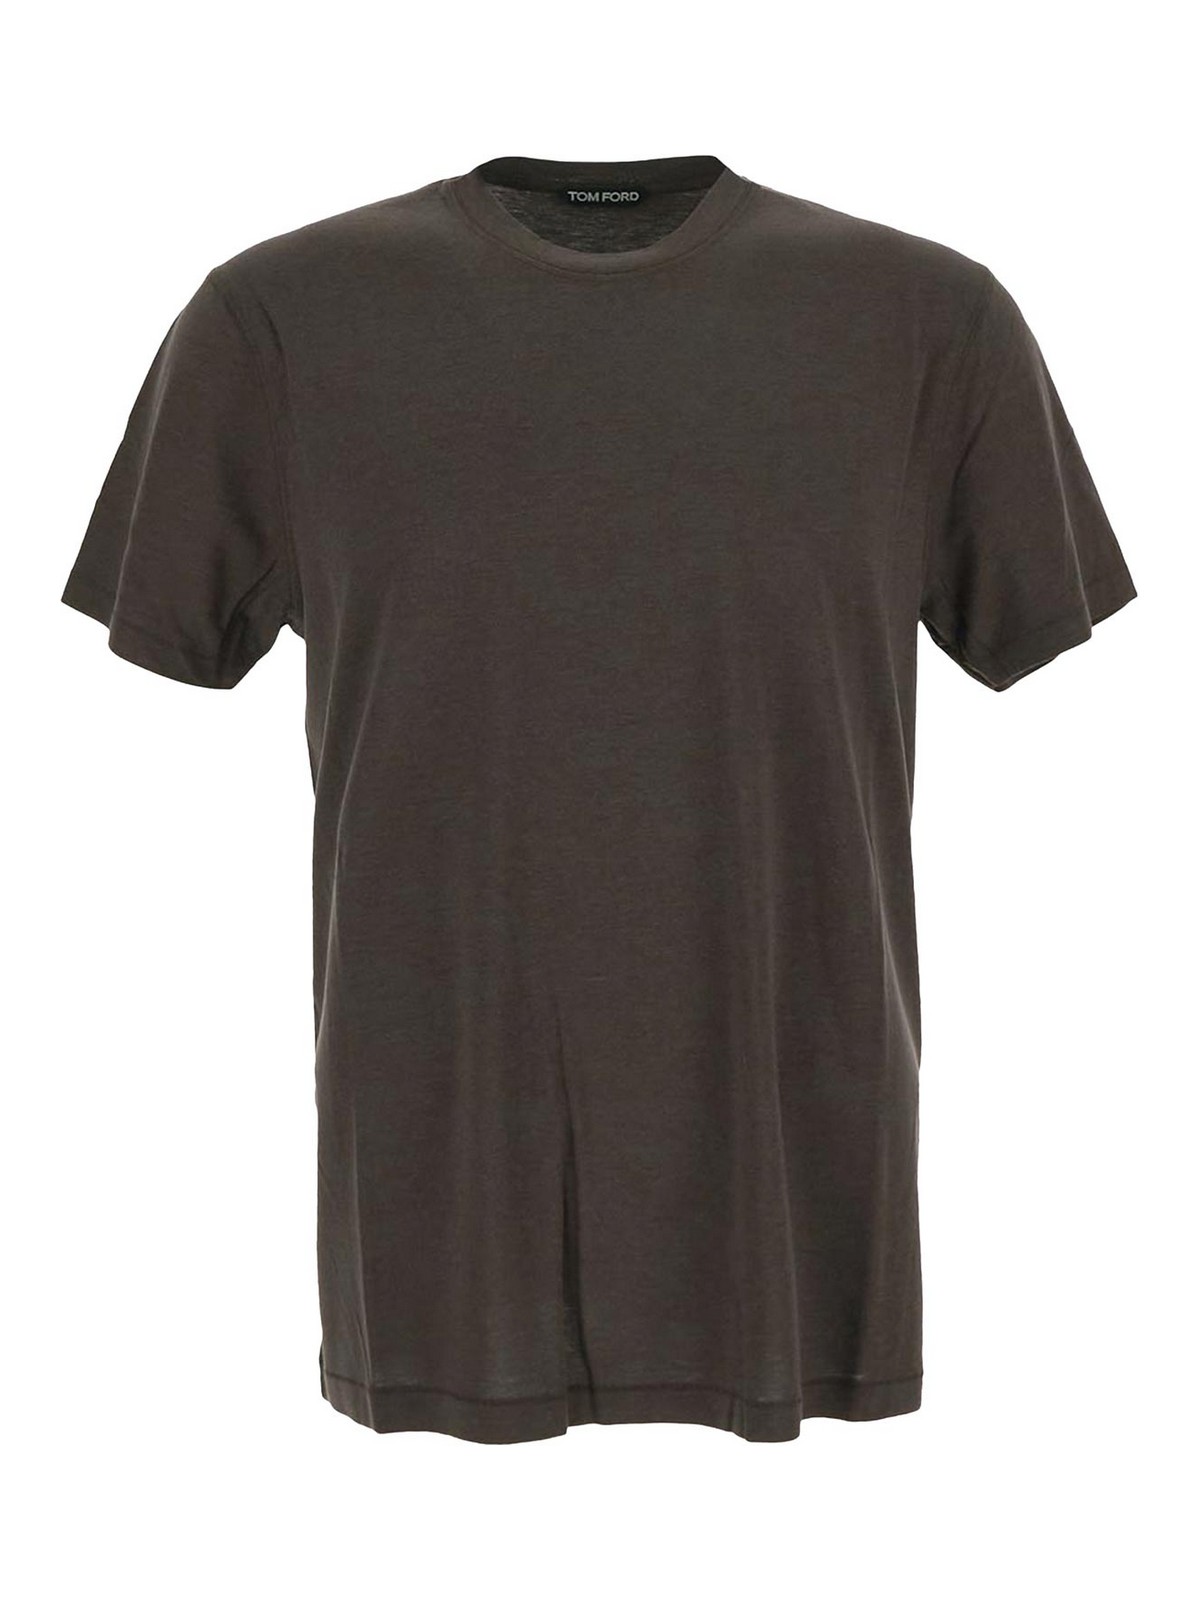 Tom Ford Brown T-shirt With Short Sleeves